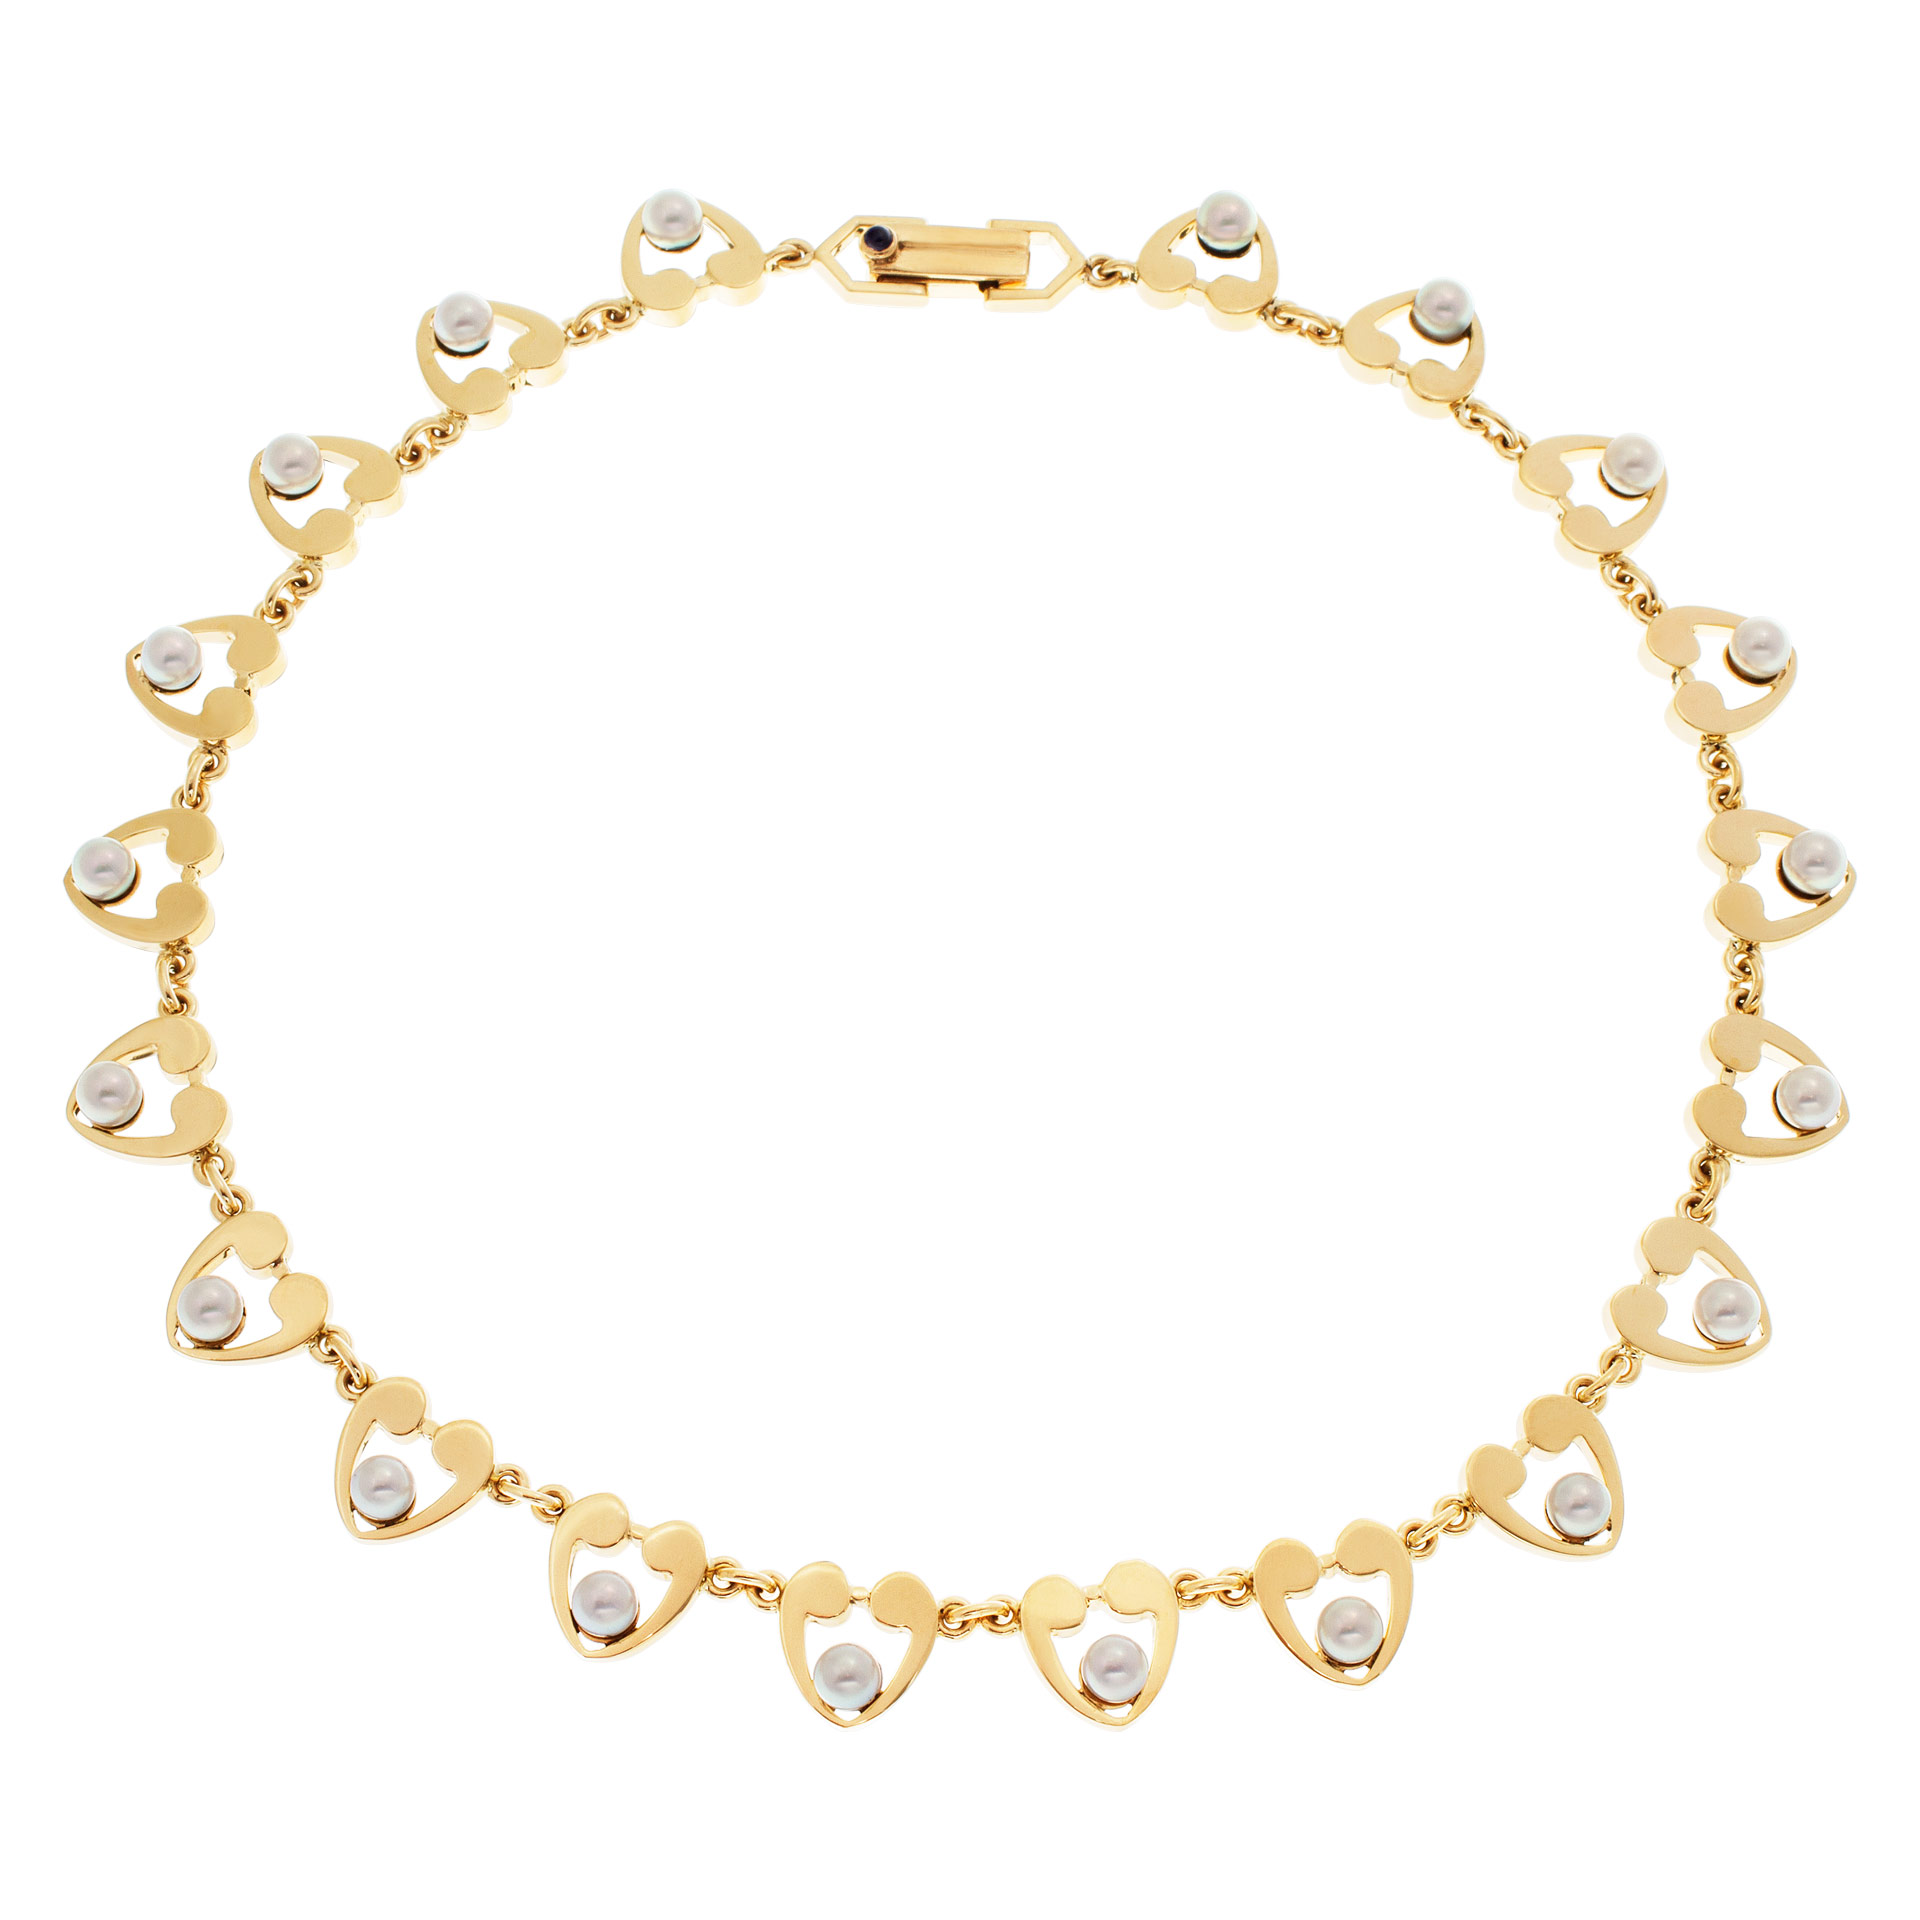 Cultured pearls (5x5.5mm) and sytlish heart design necklace in soild 14k yelllow gold. Choker necklace length: 15''. image 3